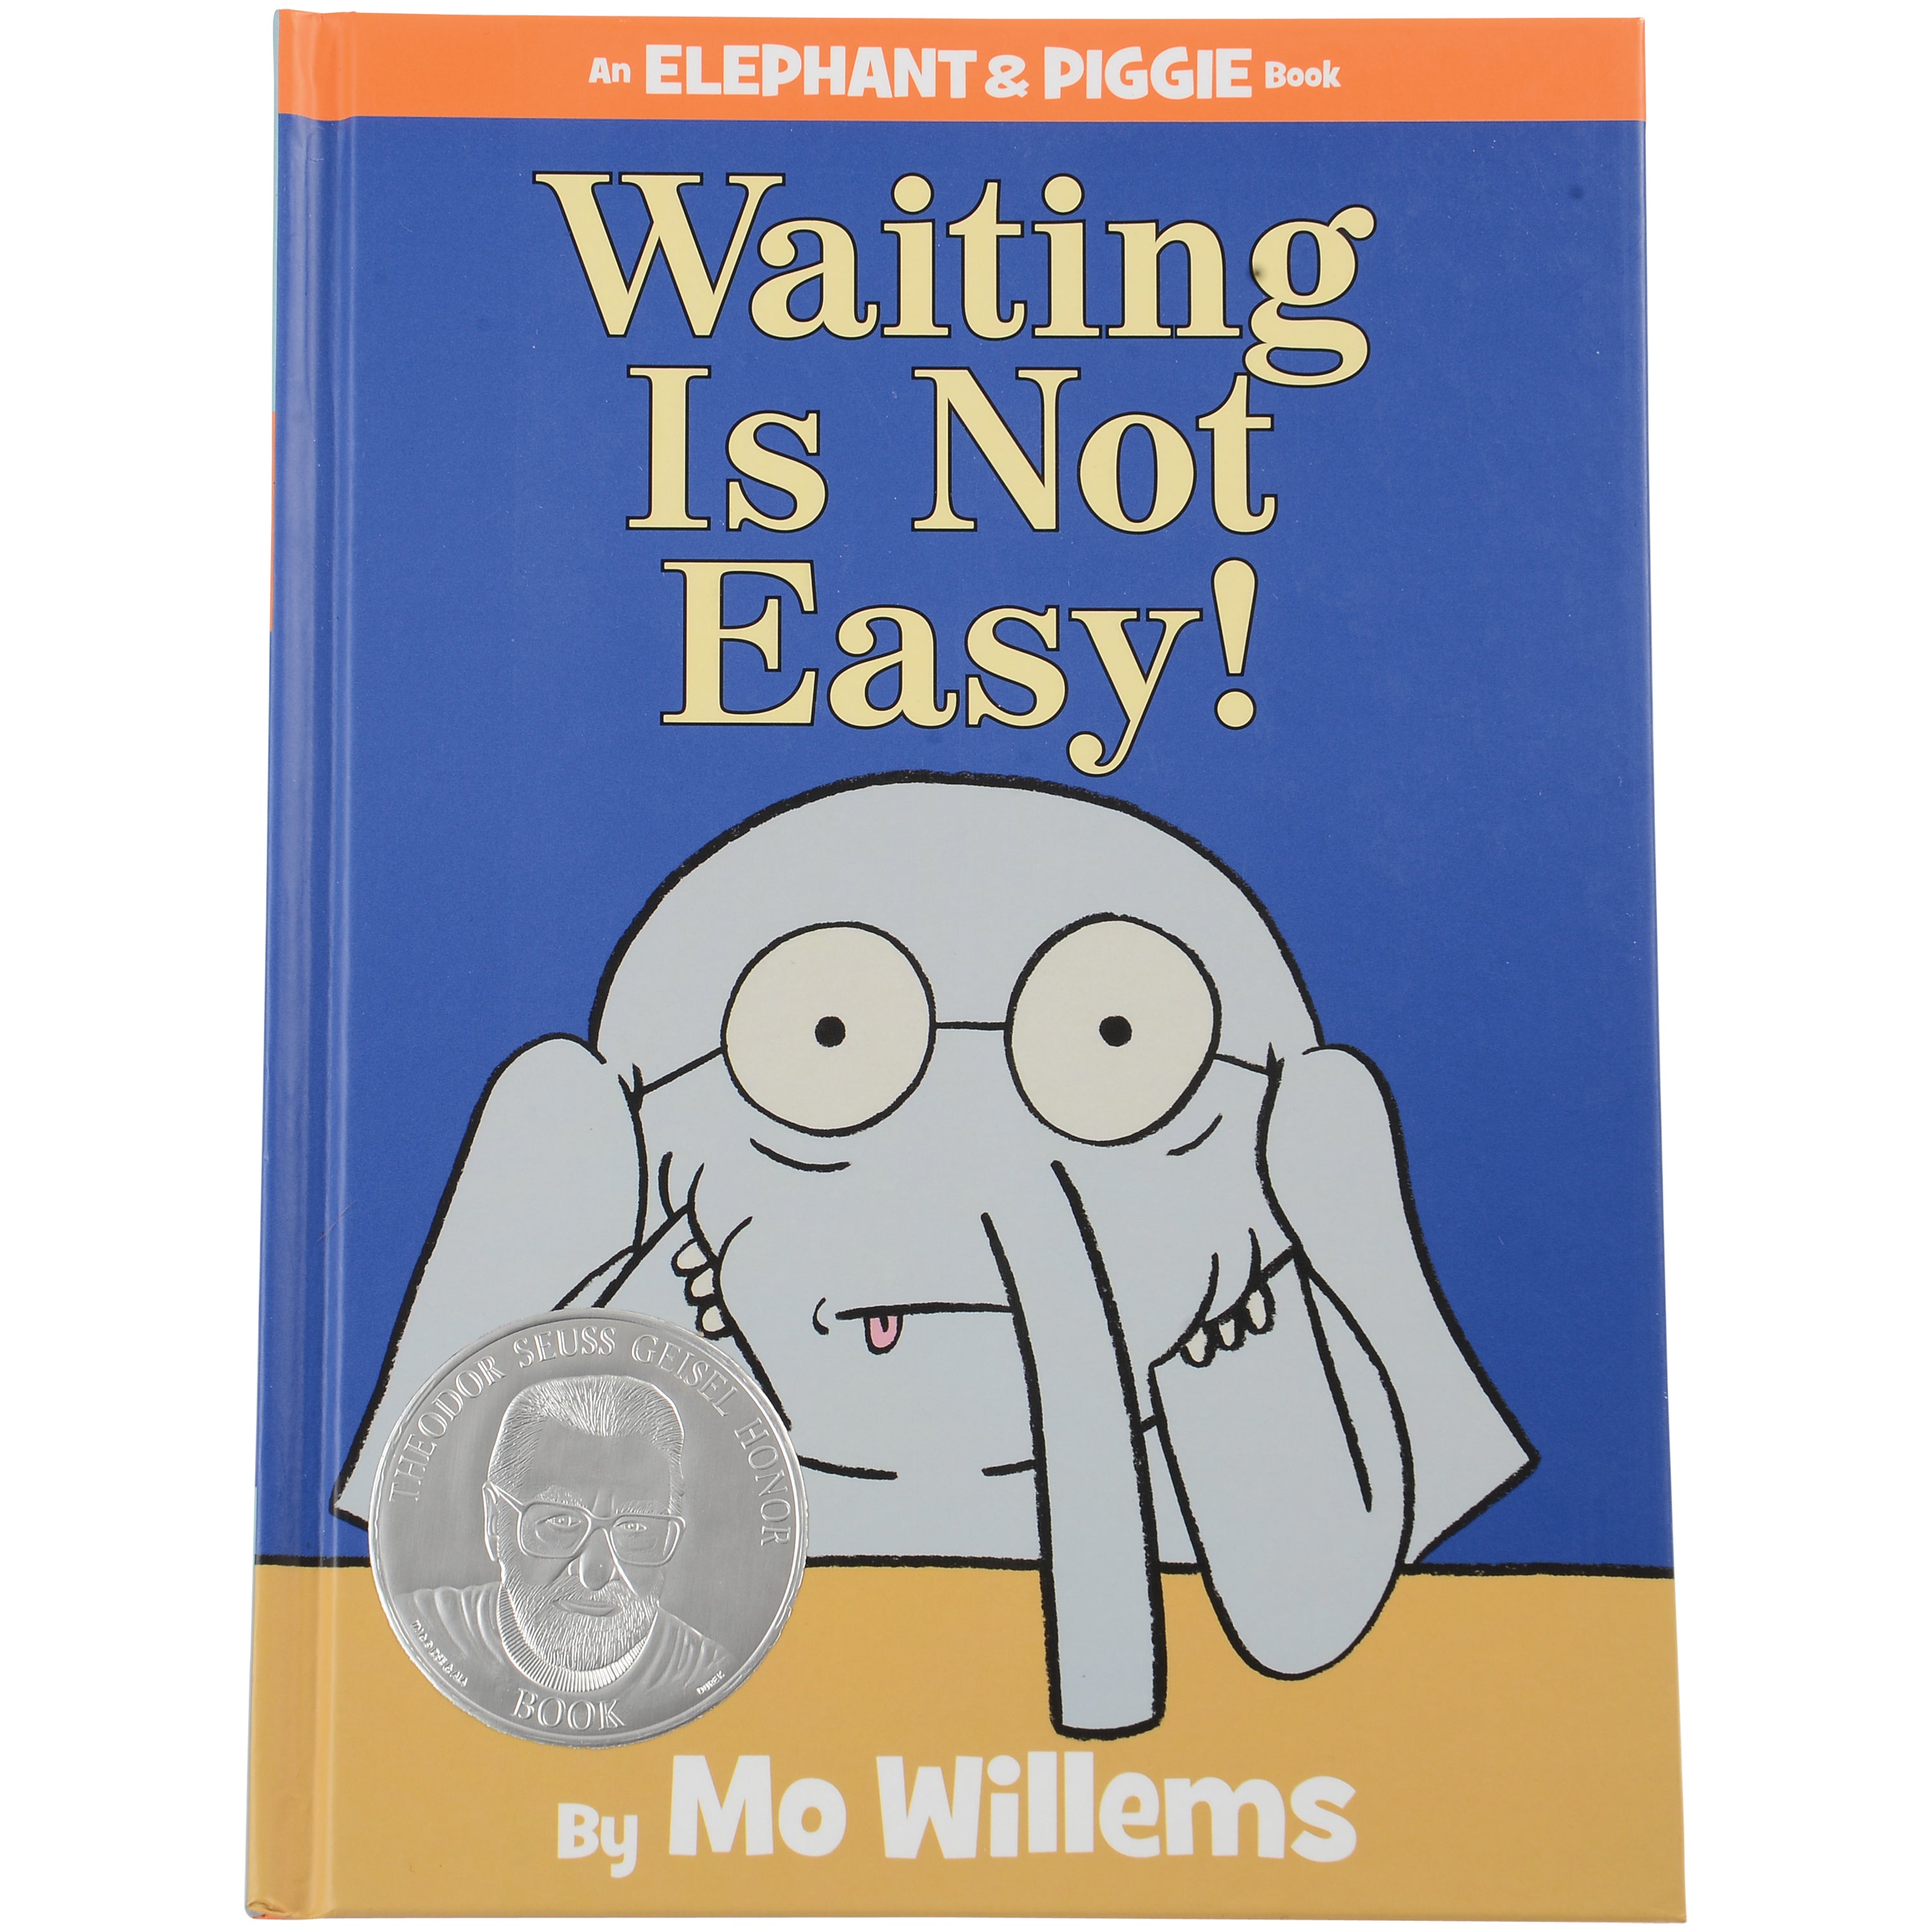 Waiting Is Not Easy - An Elephant and Piggie Book by Mo Willems